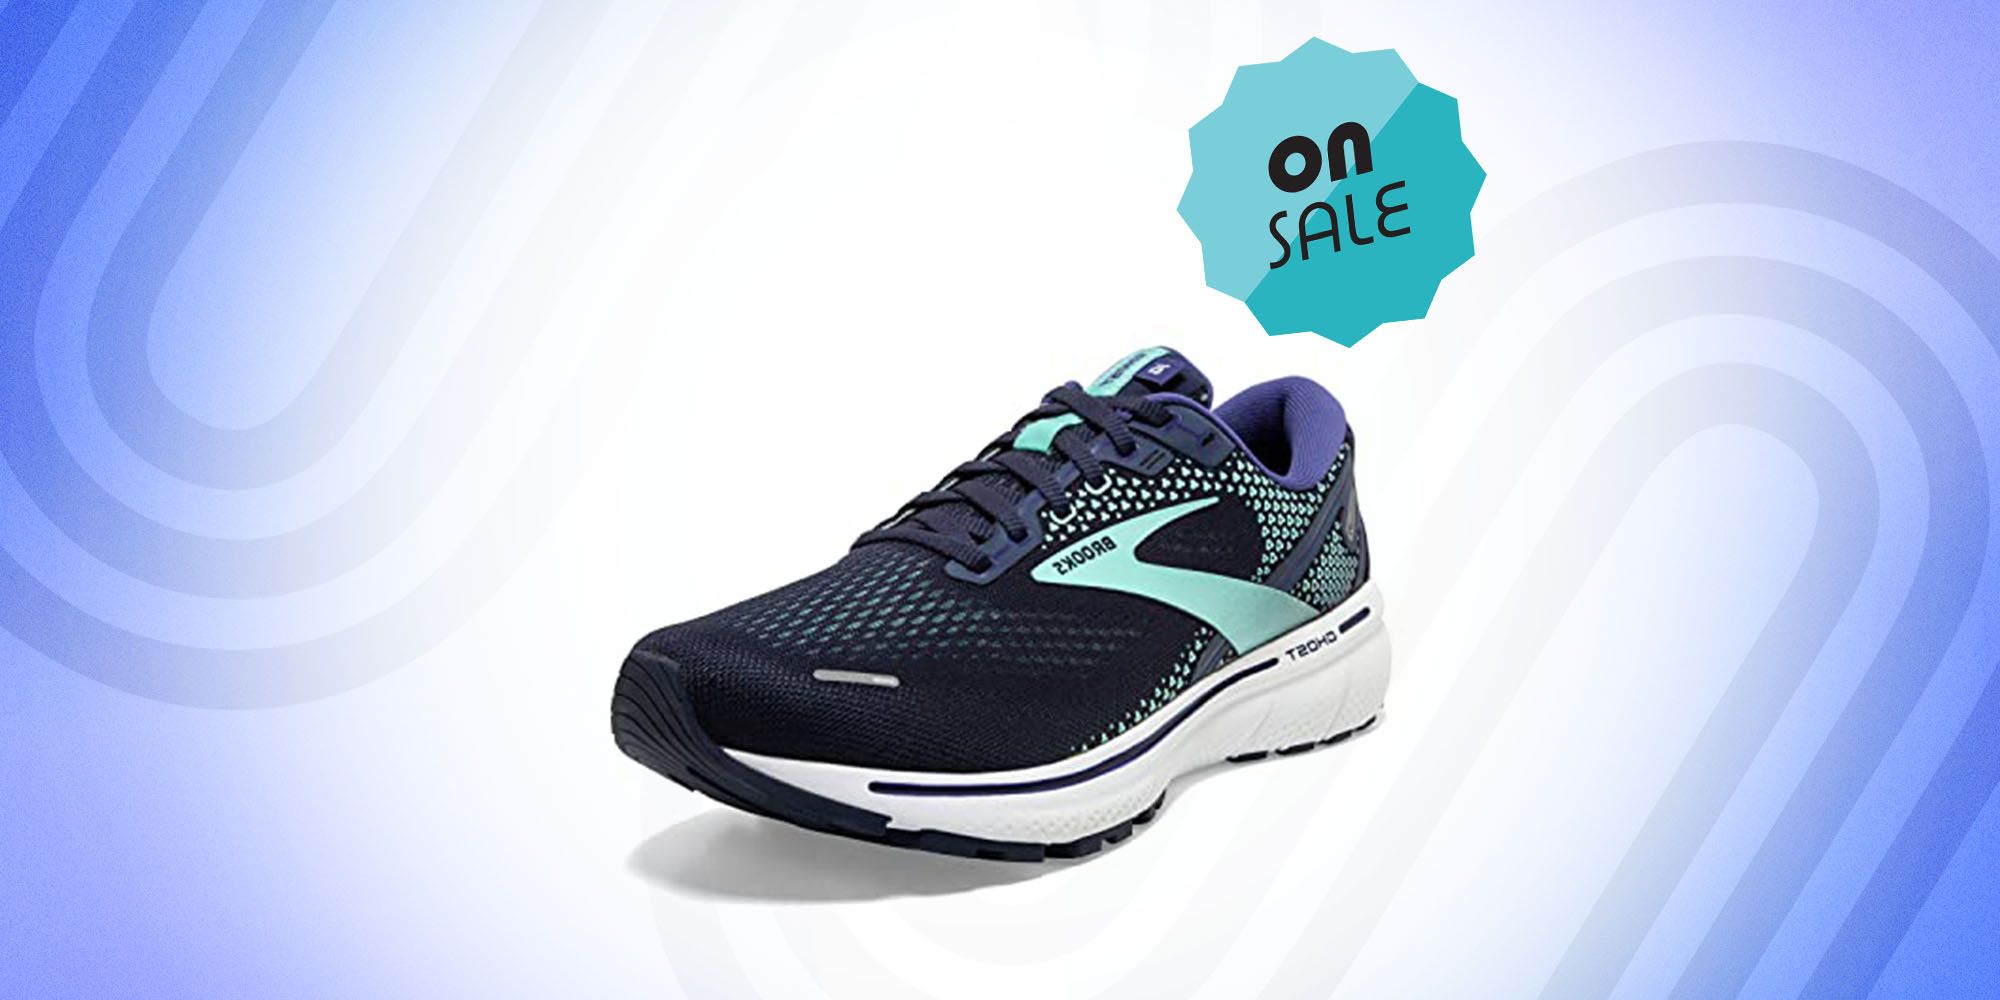 easy to handle Duty Pharynx These Brooks Running Shoes Are On A Secret Sale on Amazon Right Now